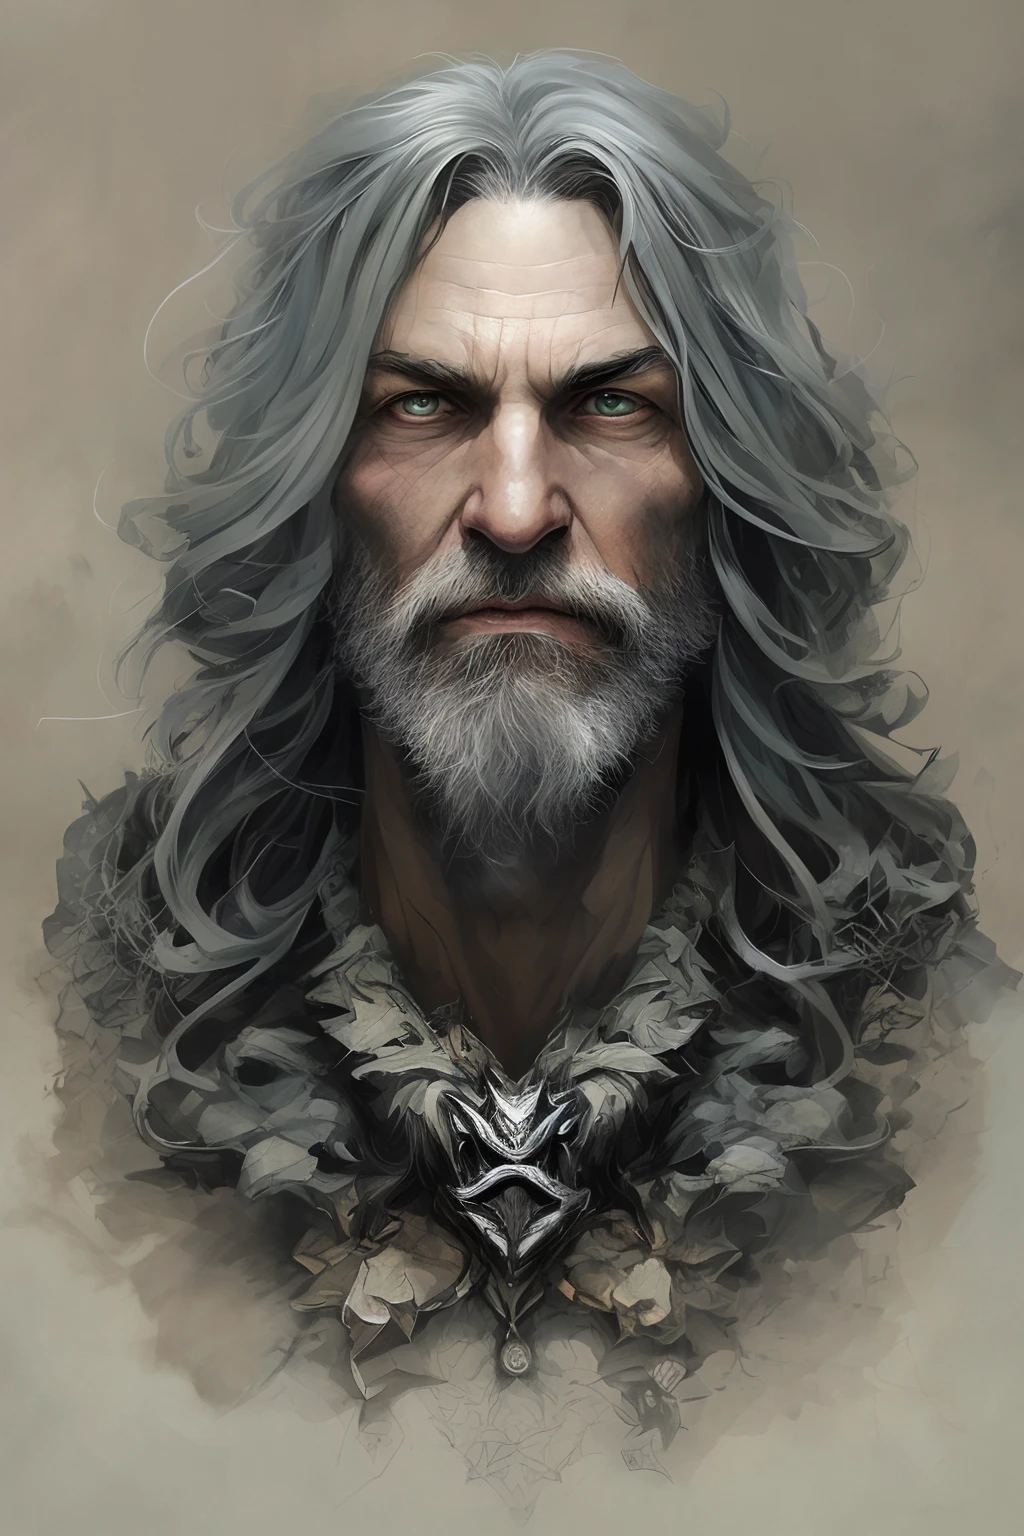 High Angle detailed ((dnd druid man portrait)), Continued , HD, (oil painting:1.1), (comic book art style:1.5),(inked outline:1.3), Stunning, Character, Portrait, (((Looking Sideways))), angular features, (dark grey Graduated Bob Hair), (muted natural colors:1.3) in painterly style by Jean Baptiste Monge